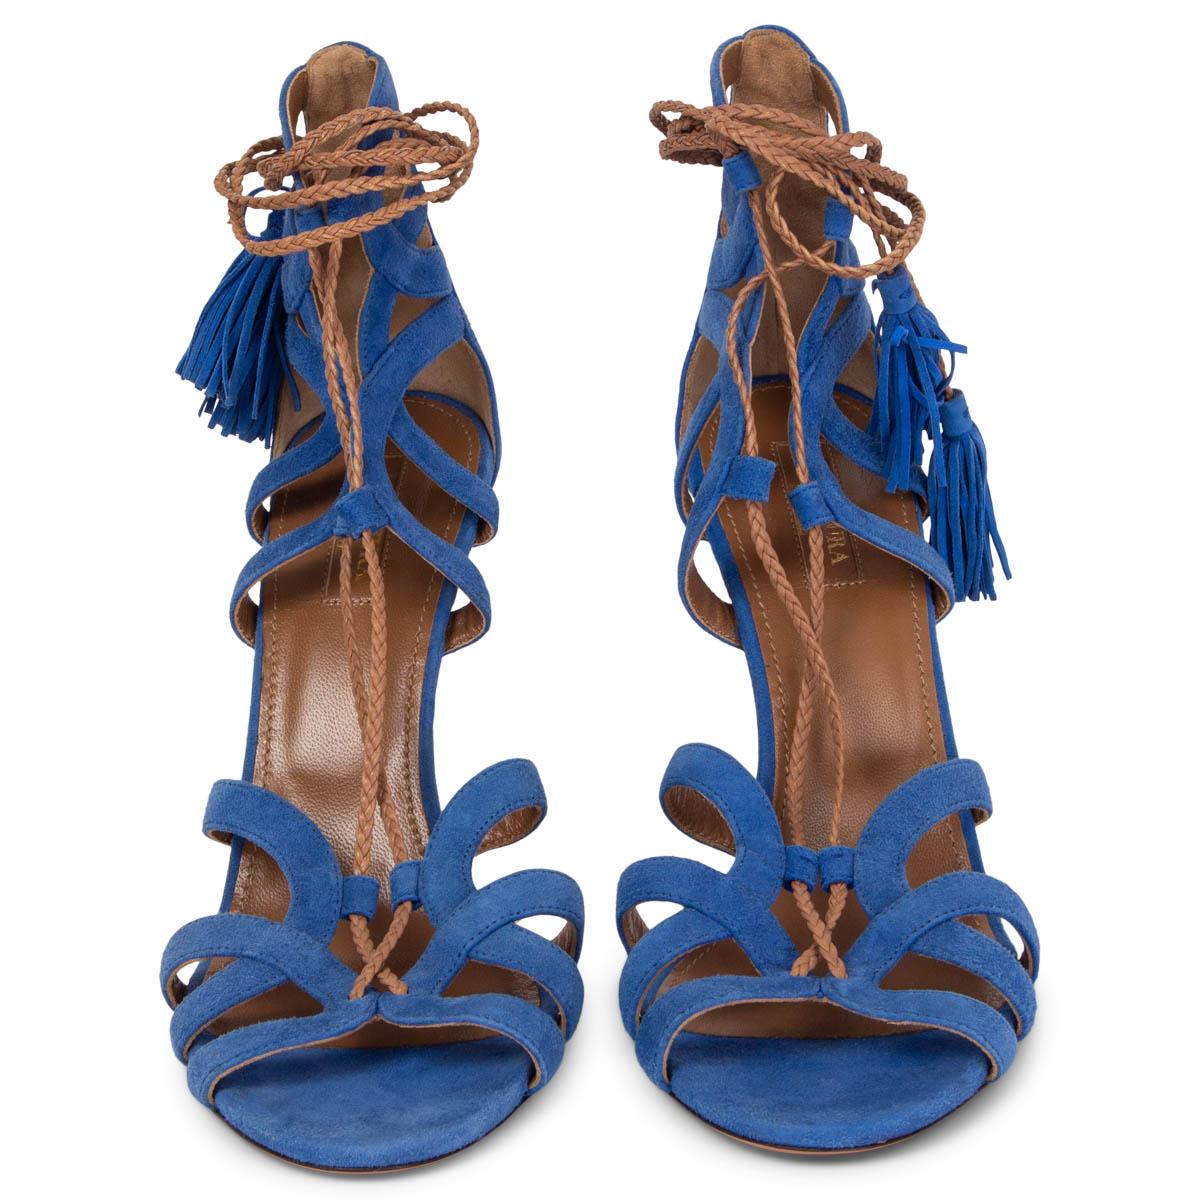 100% authentic Aquazzura Mirage ankle-strap sandals in blue suede with tan braided lace-up detail. Have been worn once and are in excellent condition. 

Measurements
Imprinted Size	39.5
Shoe Size	39.5
Inside Sole	26cm (10.1in)
Width	7.5cm